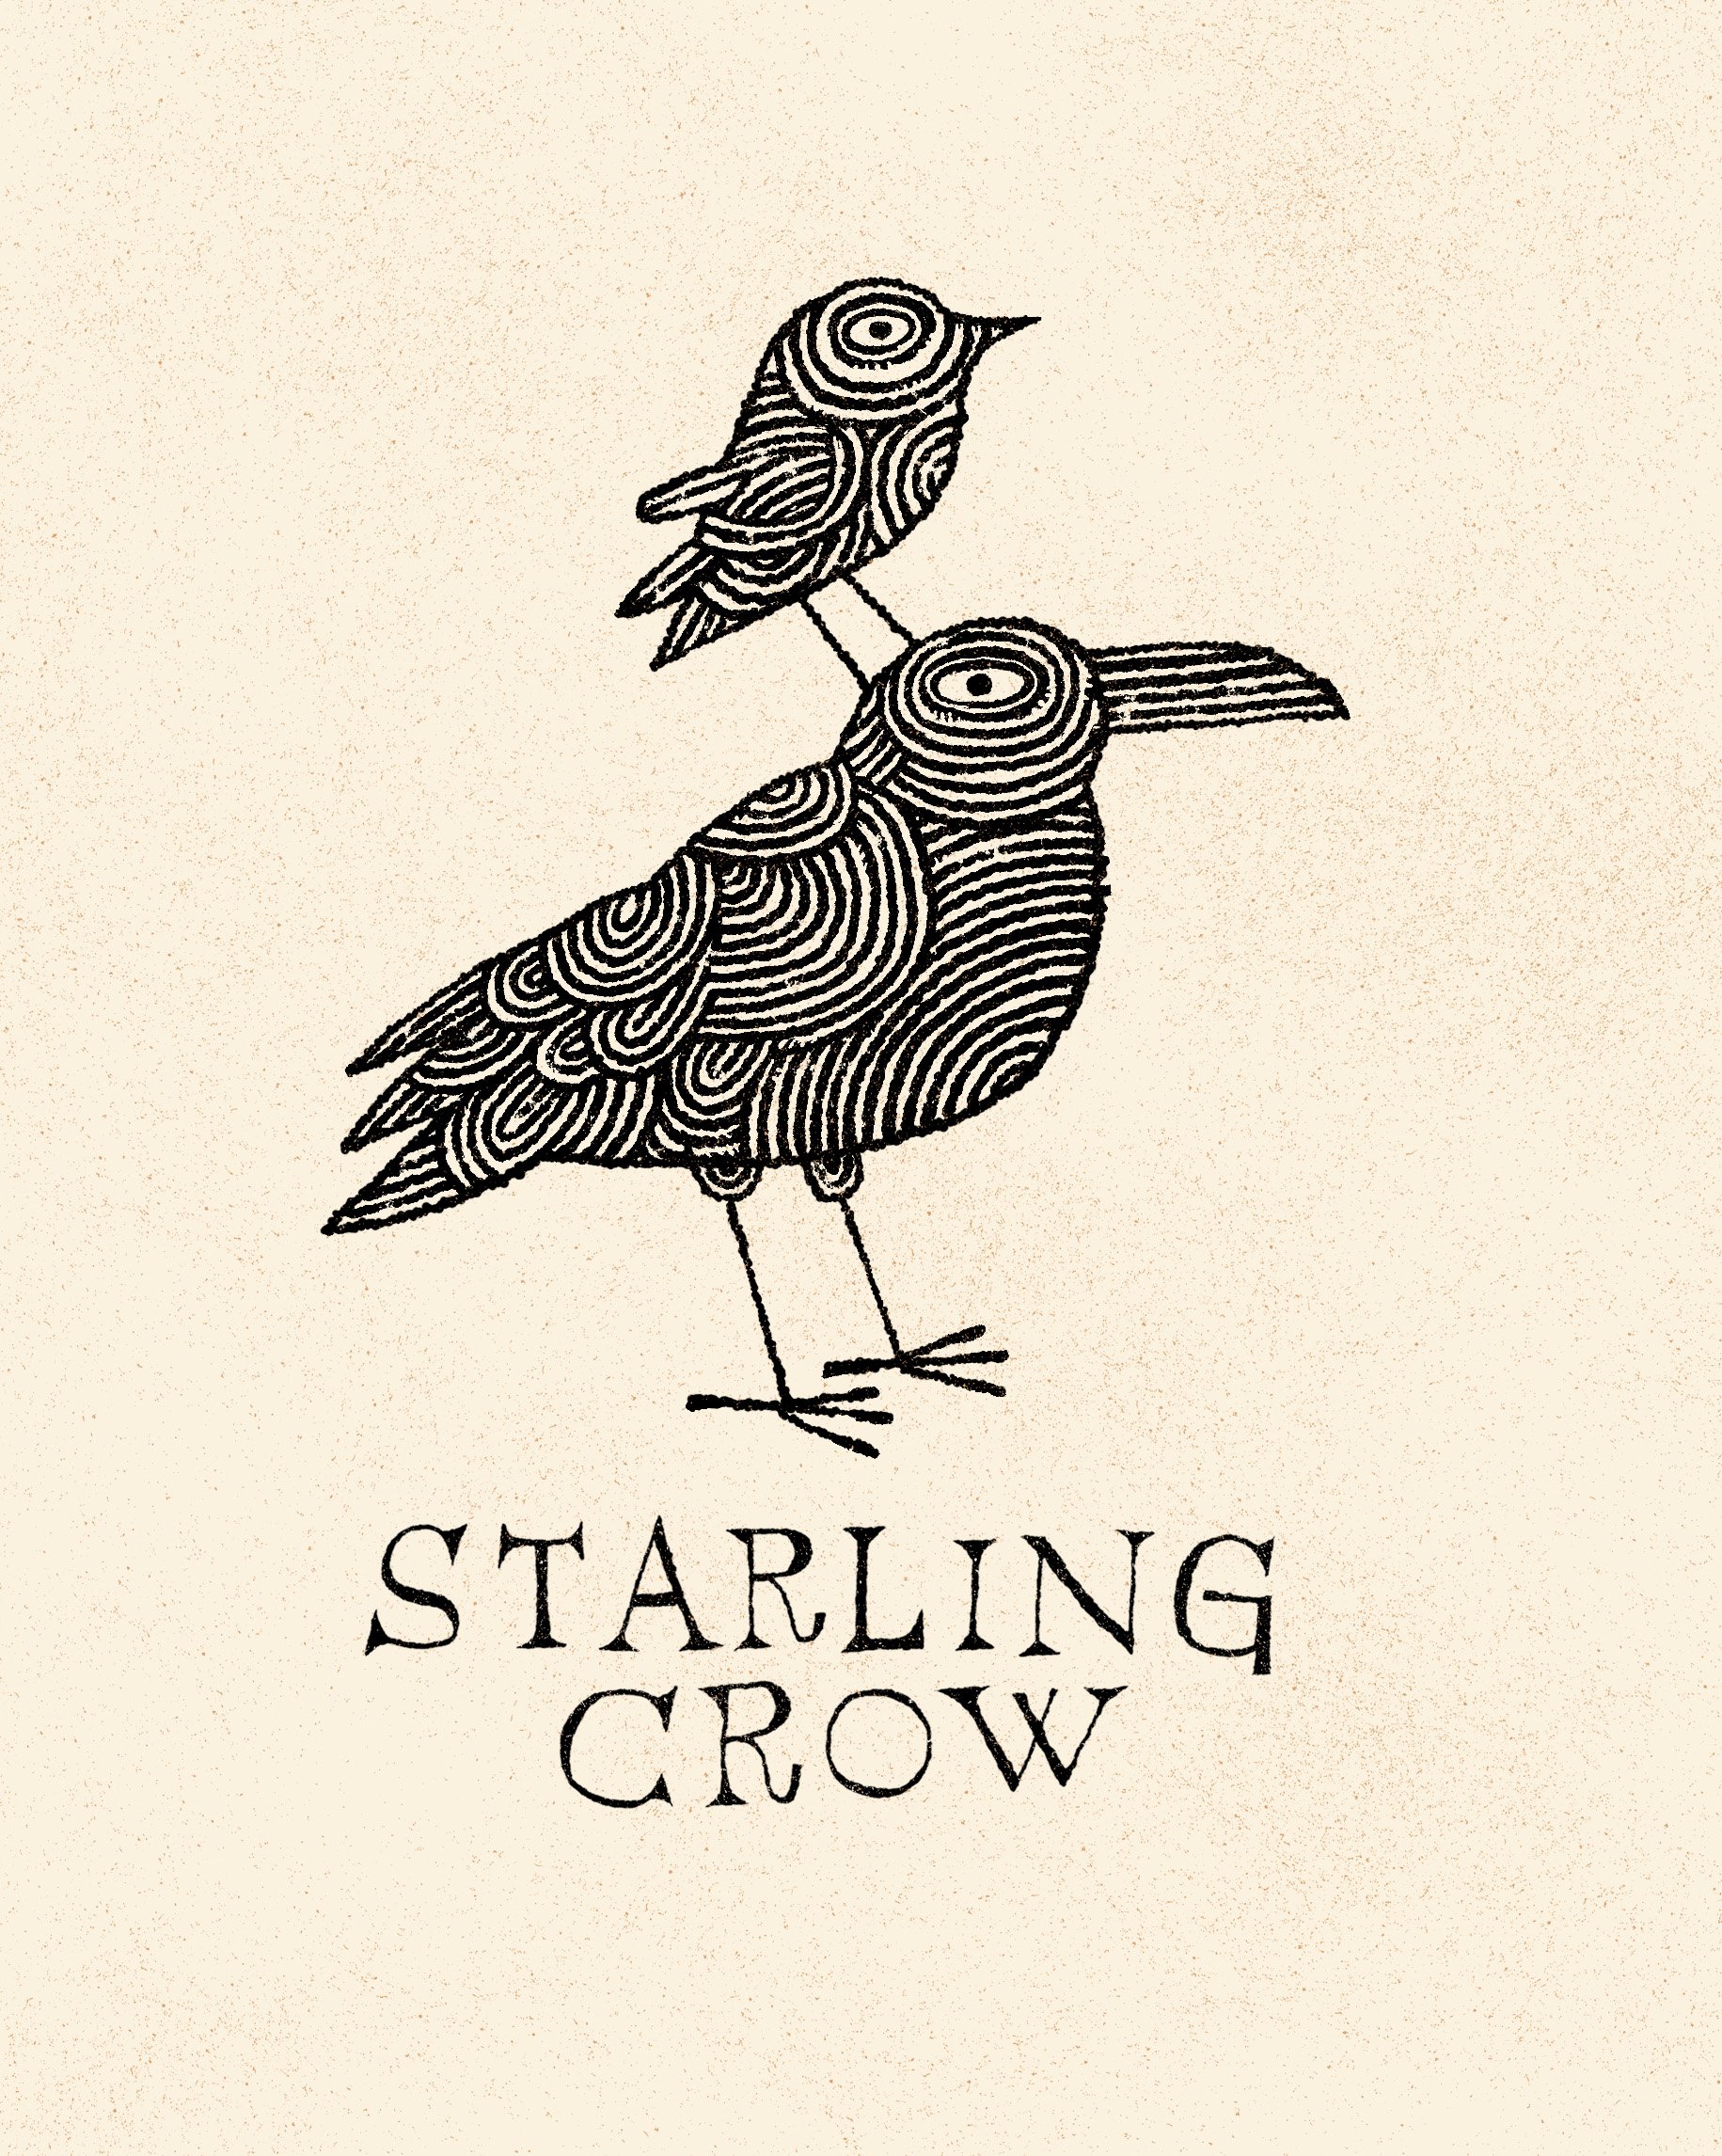 Starling crow just the logo.jpg